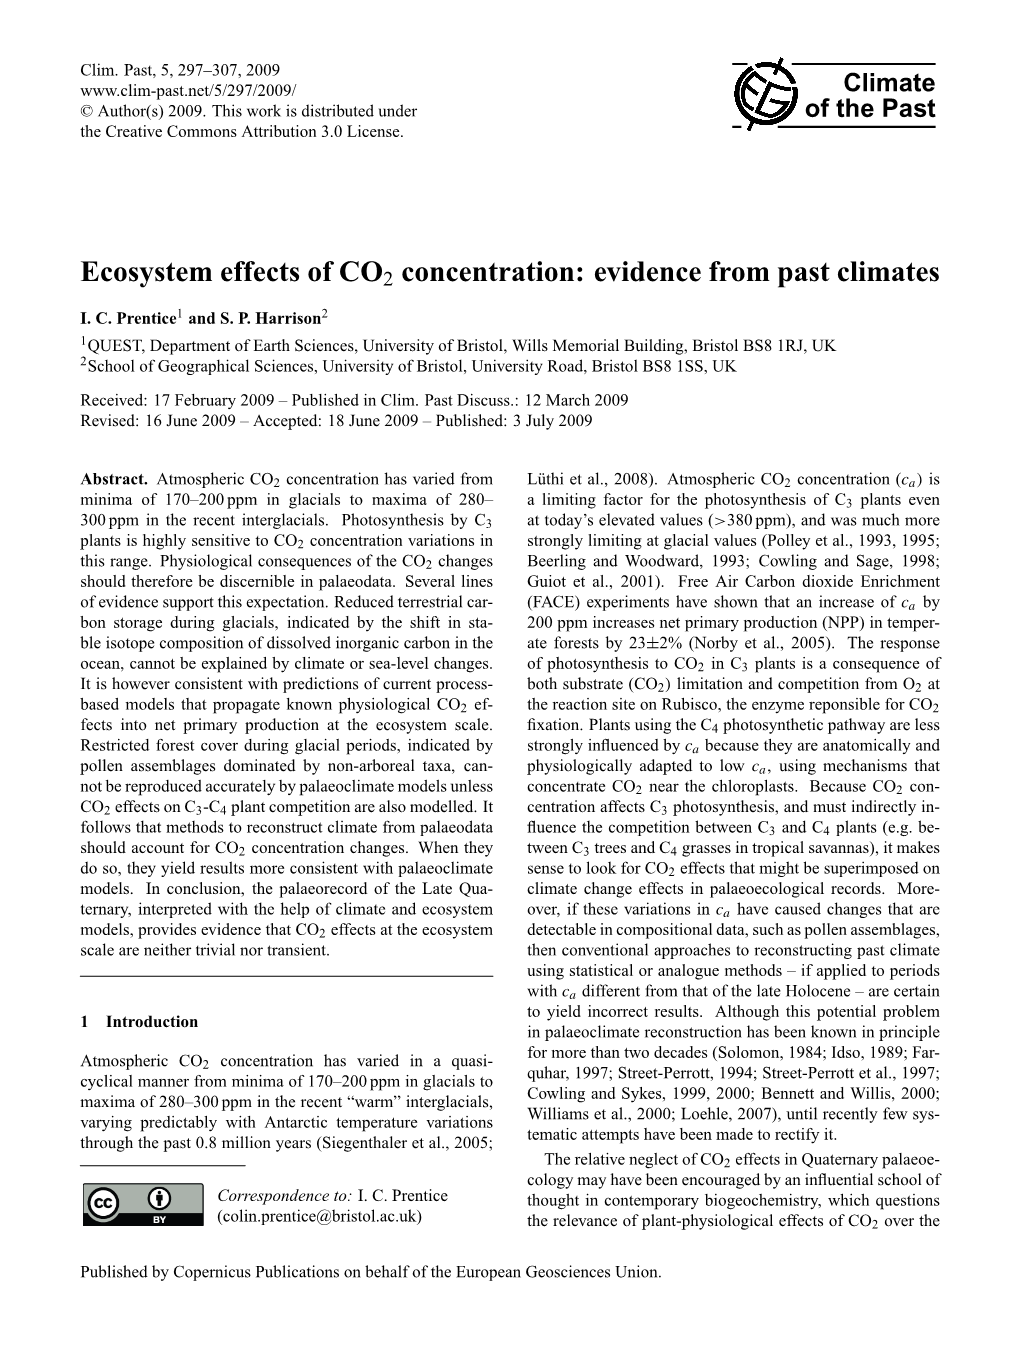 Ecosystem Effects of CO2 Concentration: Evidence from Past Climates